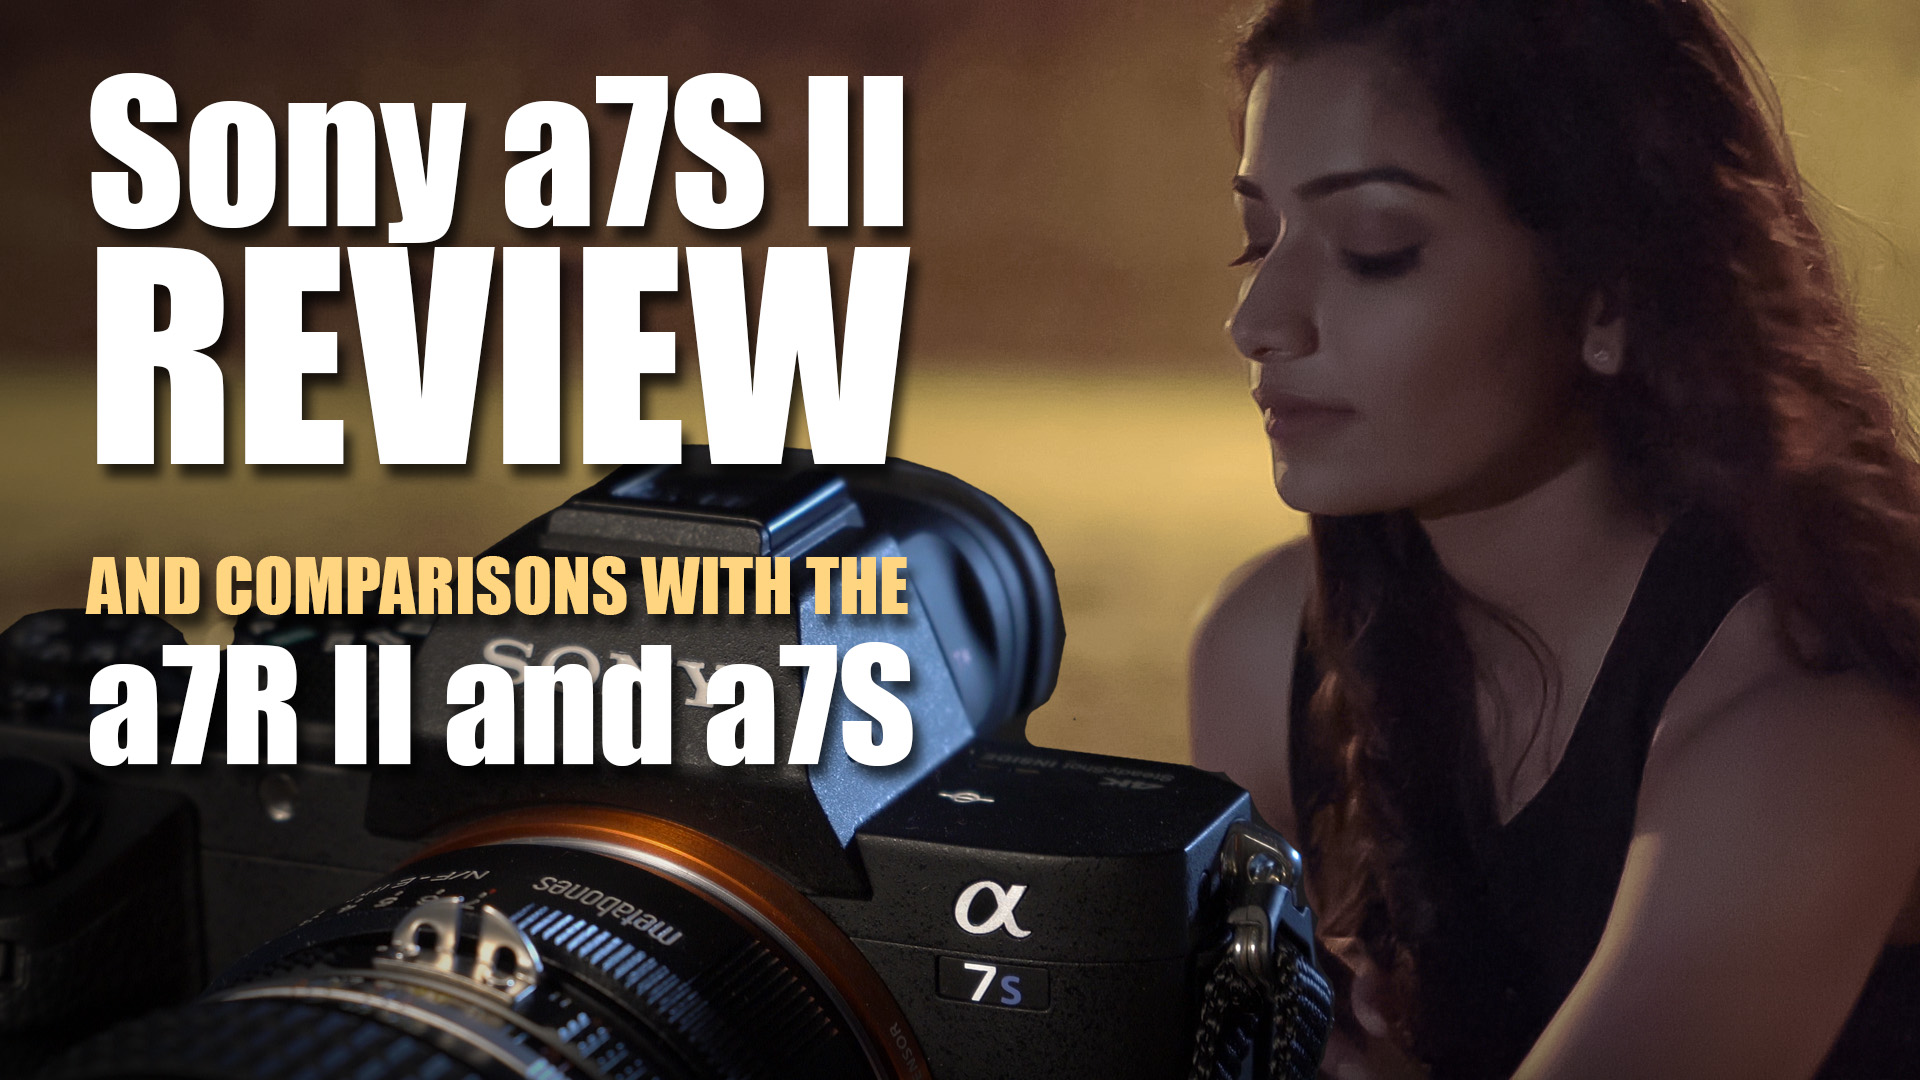 Sony a7S Review and Comparisons with Sony a7R II and